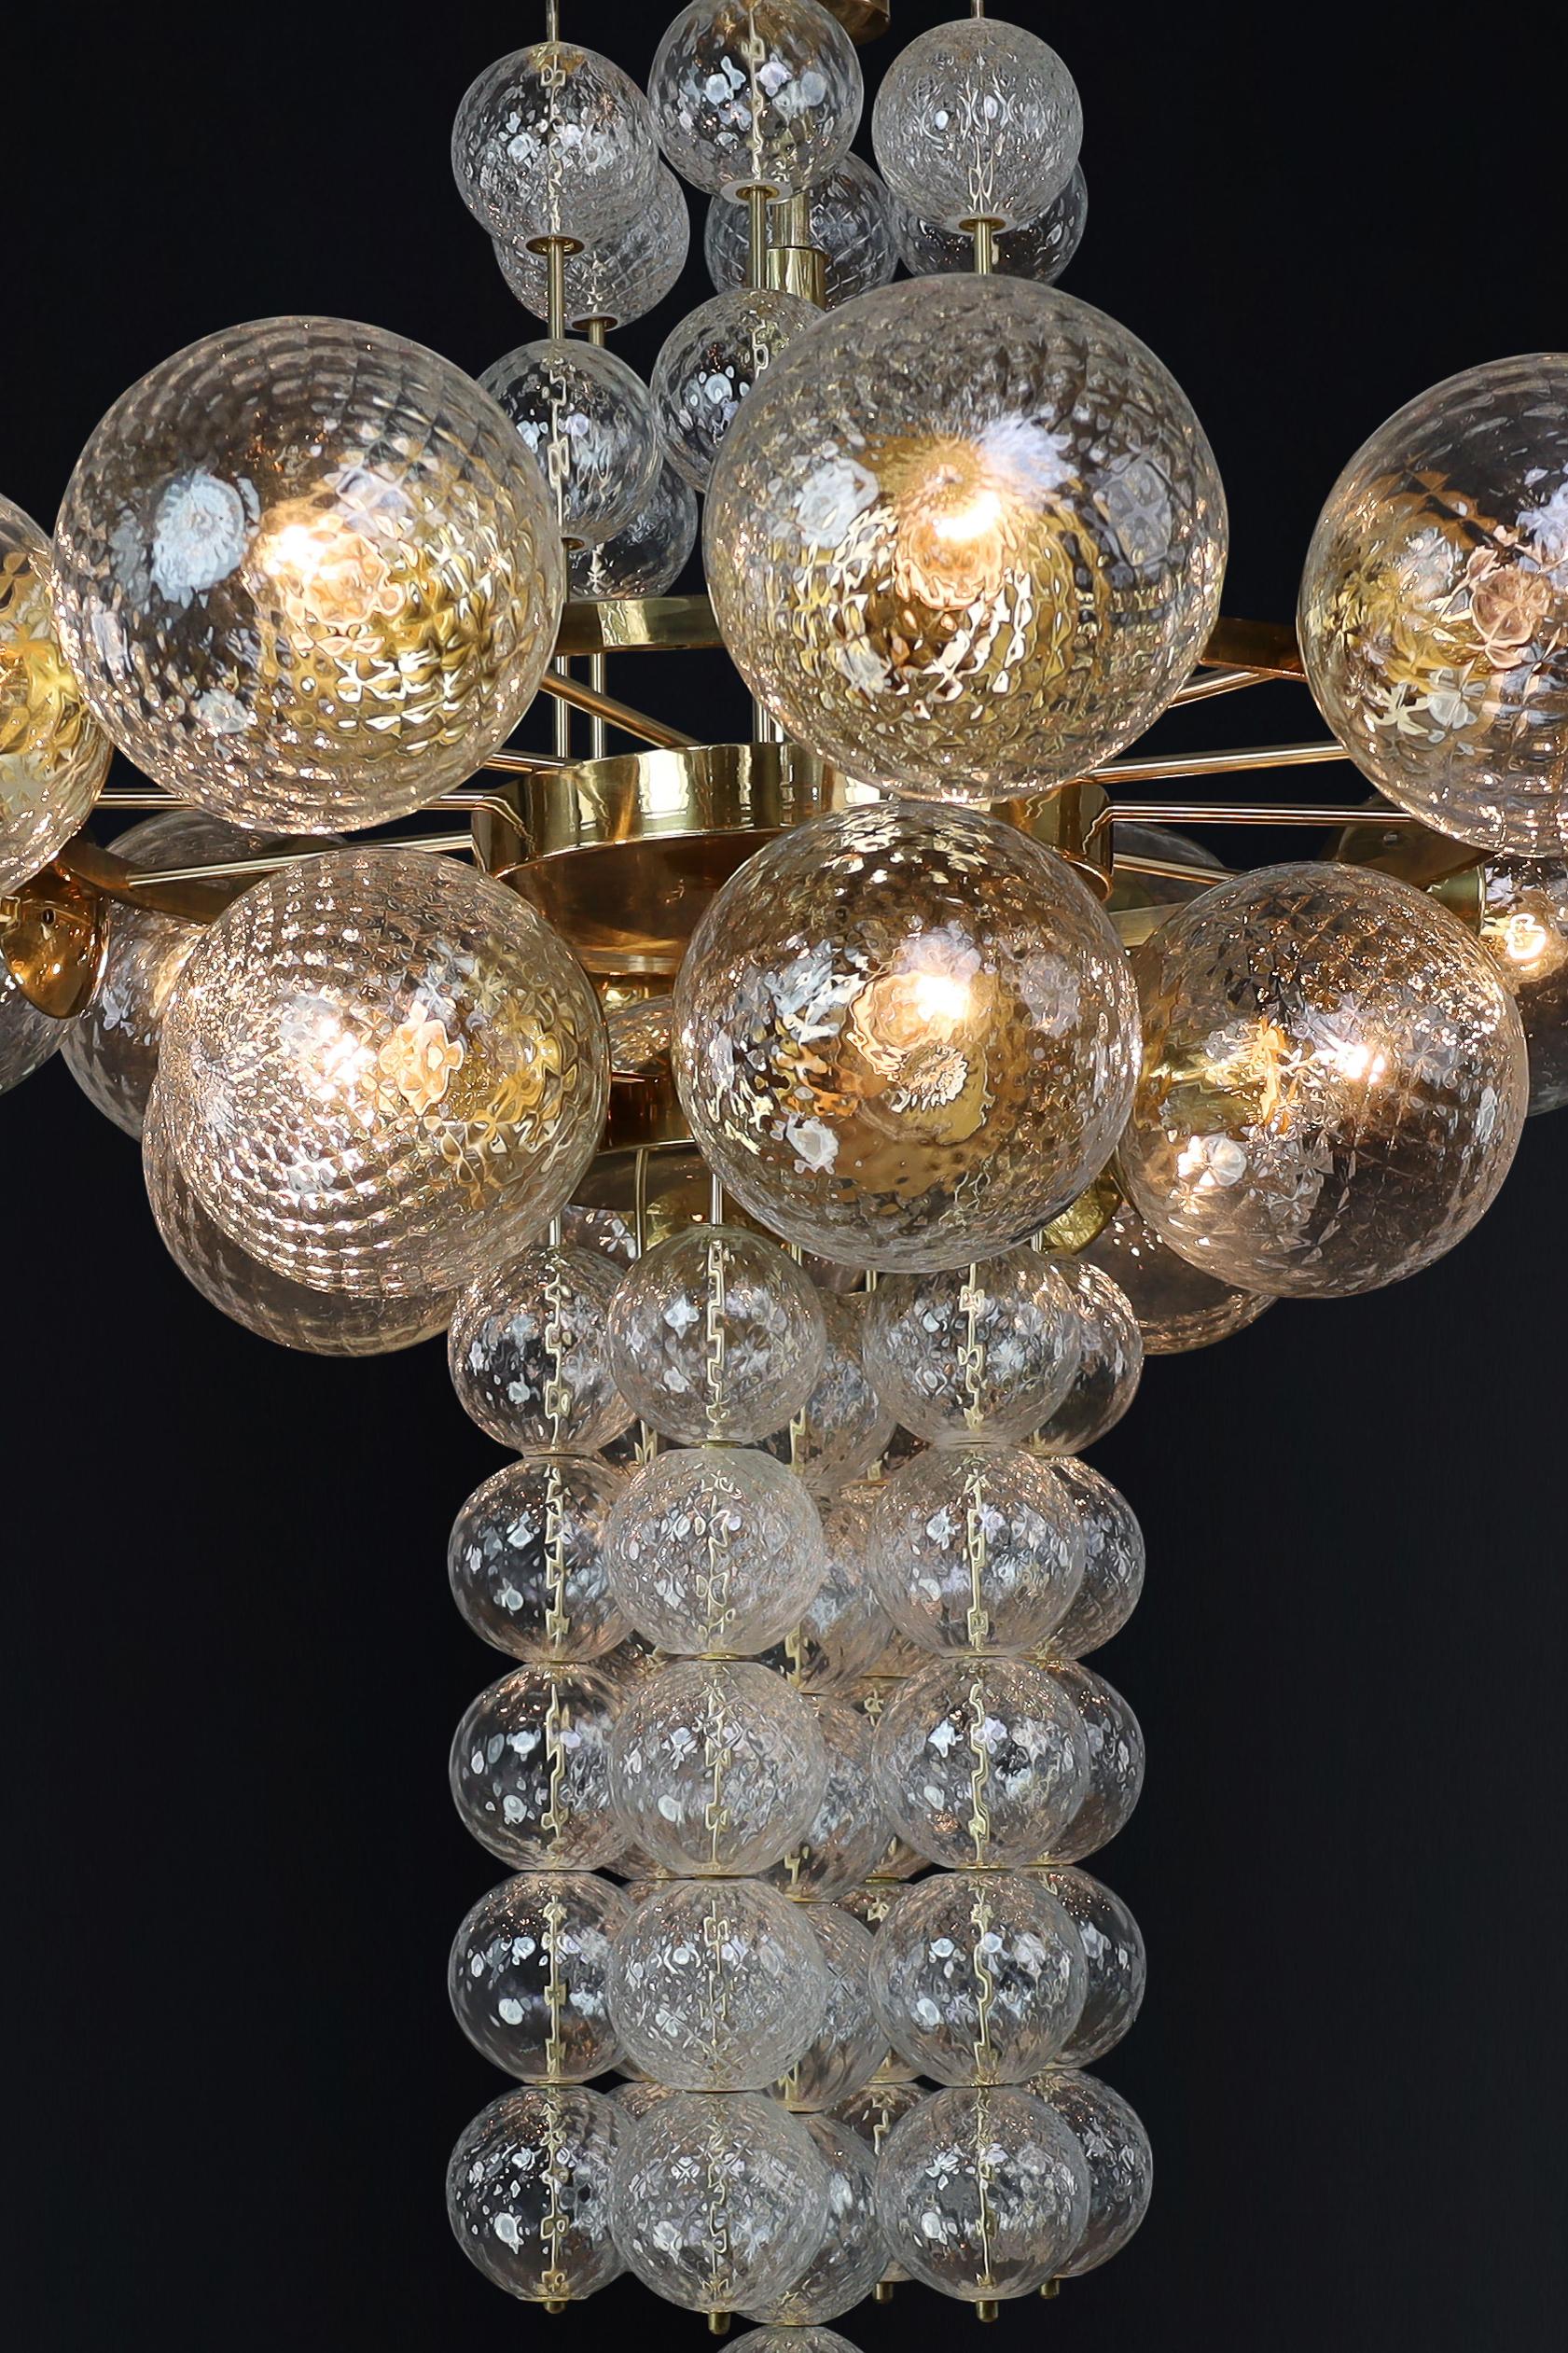 Large Chandelier with brass fixture and hand-blowed glass globes by Preciosa Cz. For Sale 5